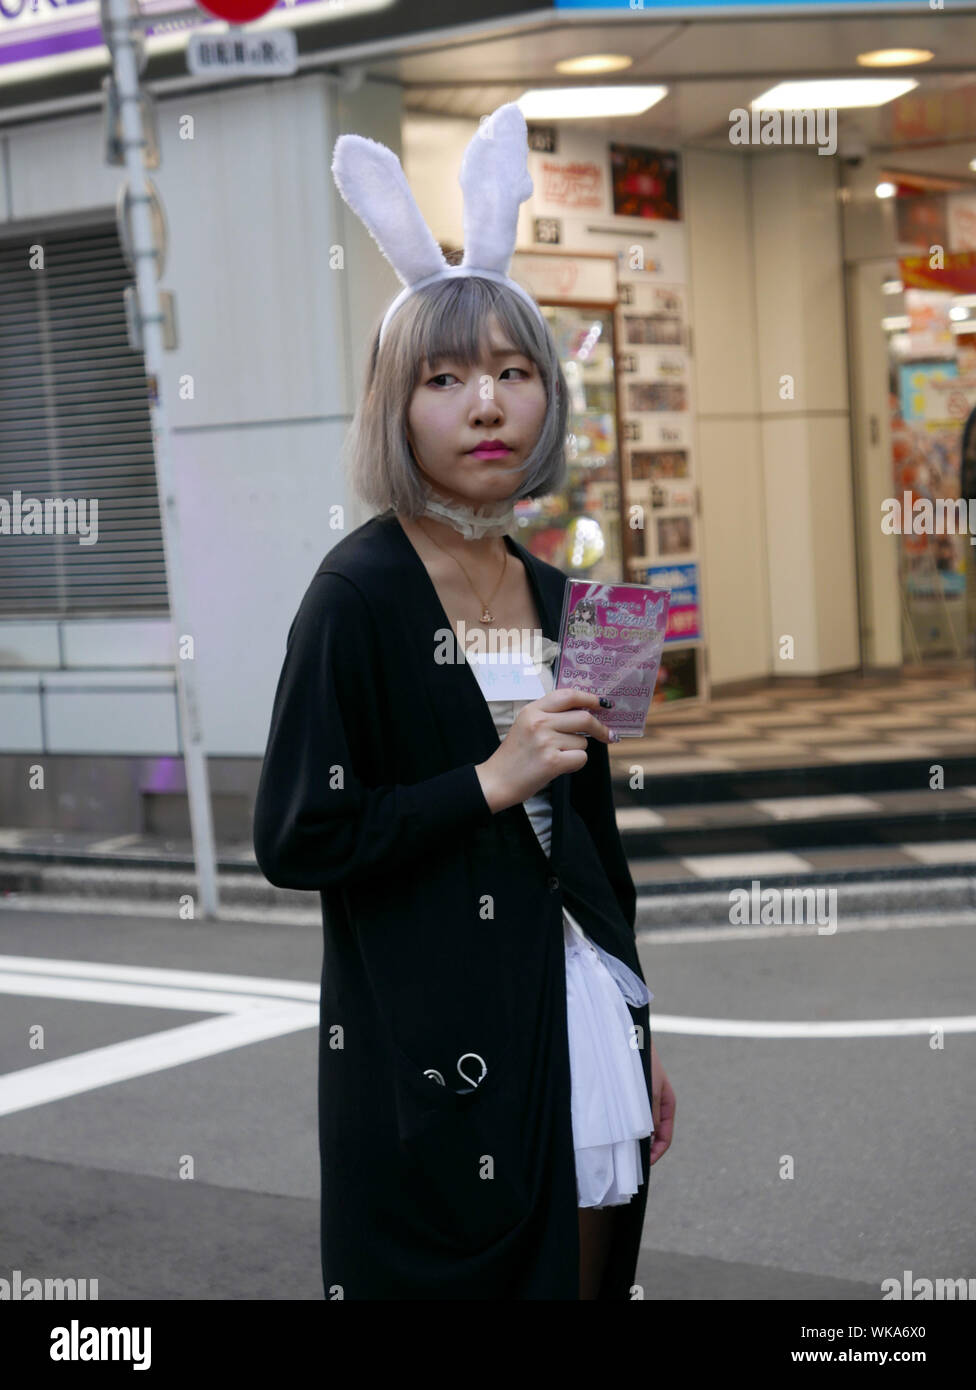 JAPAN - photo by Sean Sprague  Akihabara, Tokyo, by night. Prostitutes dressed as maids or other costumes. 'cos play'. Stock Photo